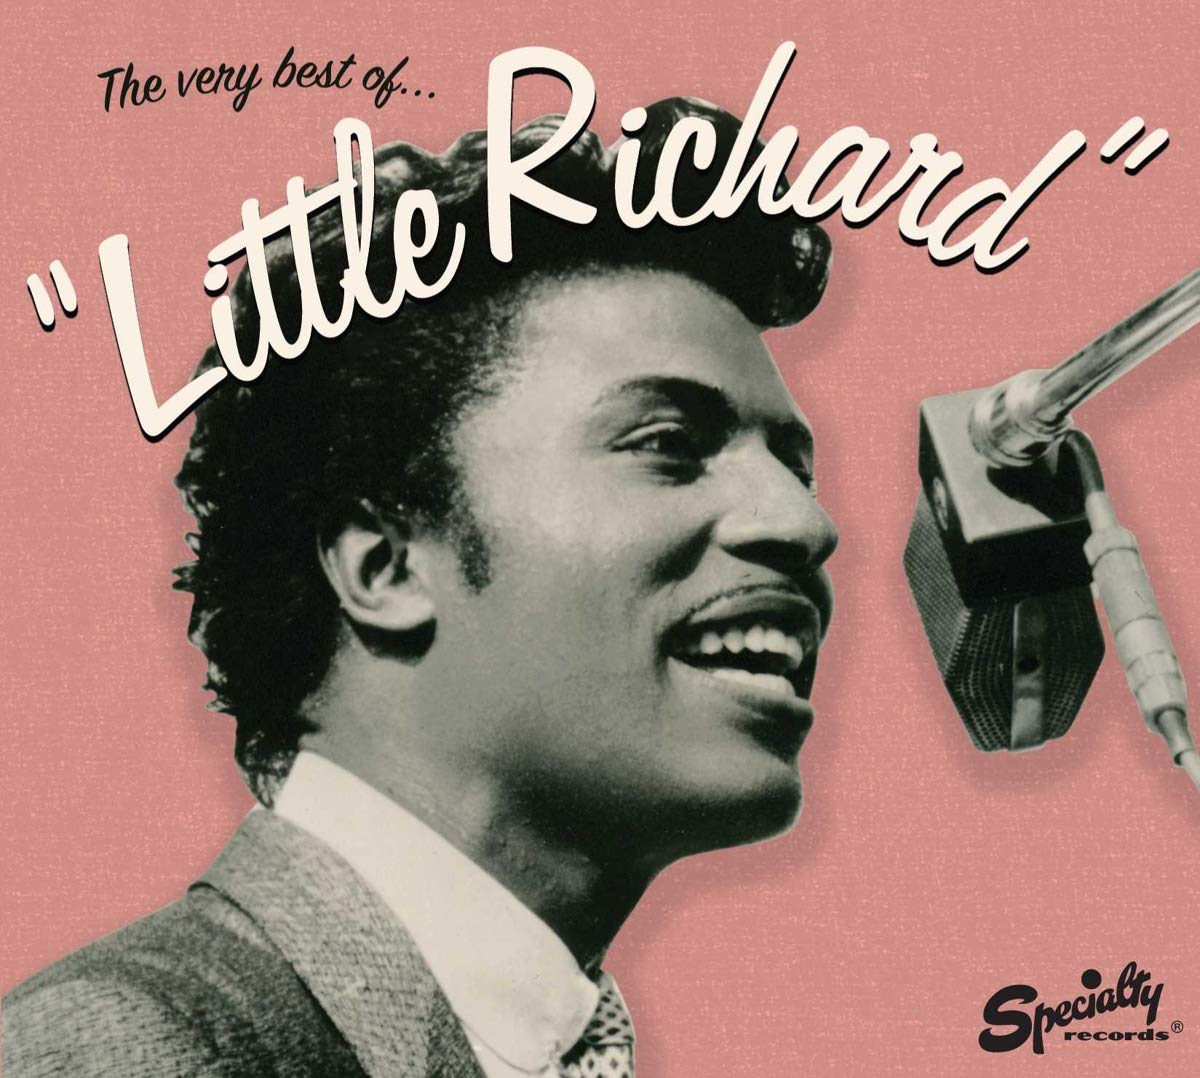 CNN and HBO Max Move Forward with 'Little Richard: I Am Everything'